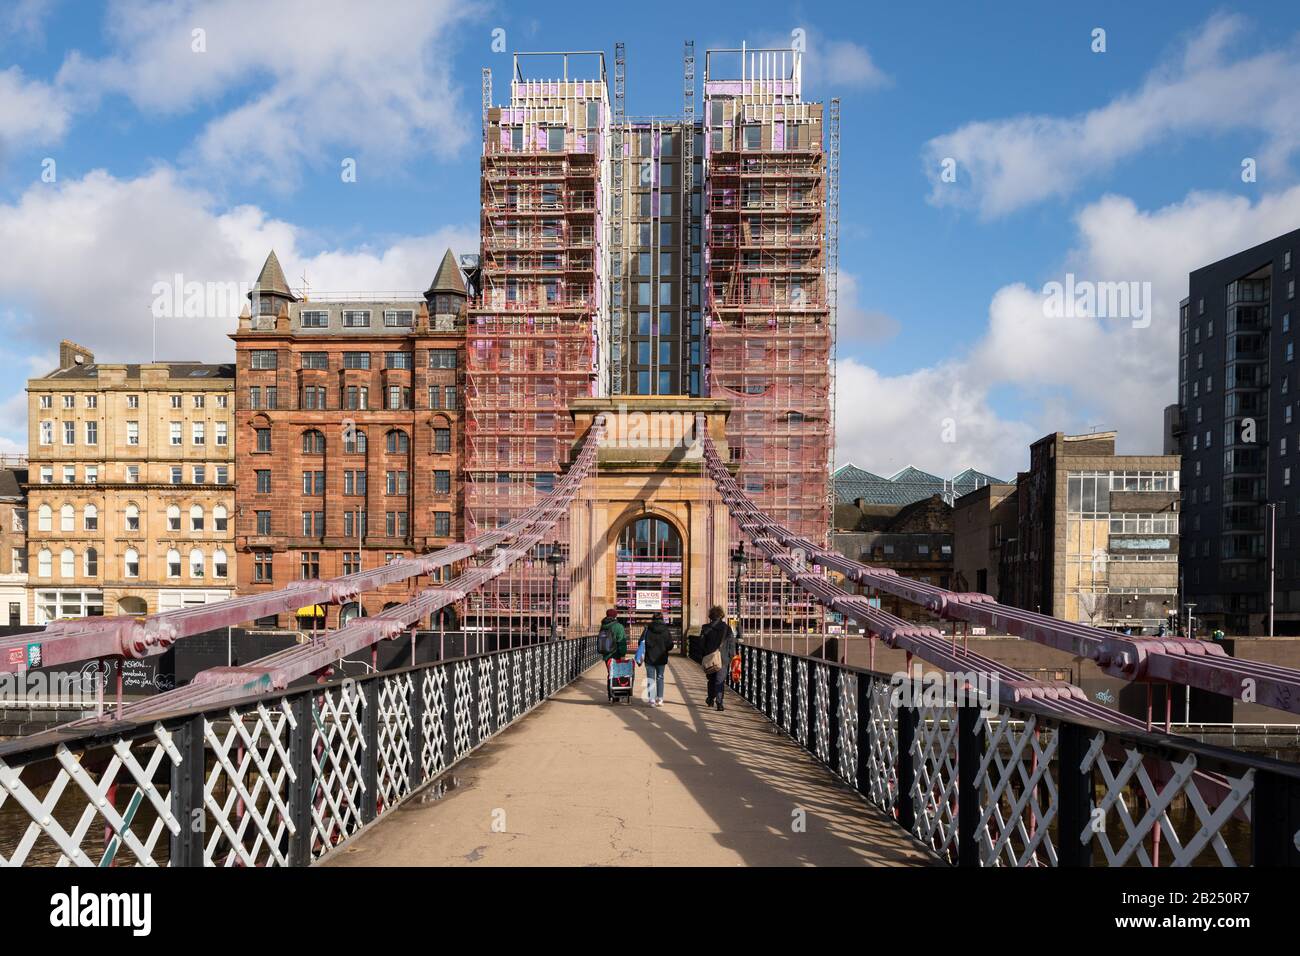 Construction of Accor Tribe Hotel, under construction on Clyde Street, Glasgow, Scotland as viewed from Portland Street suspension bridge Stock Photo